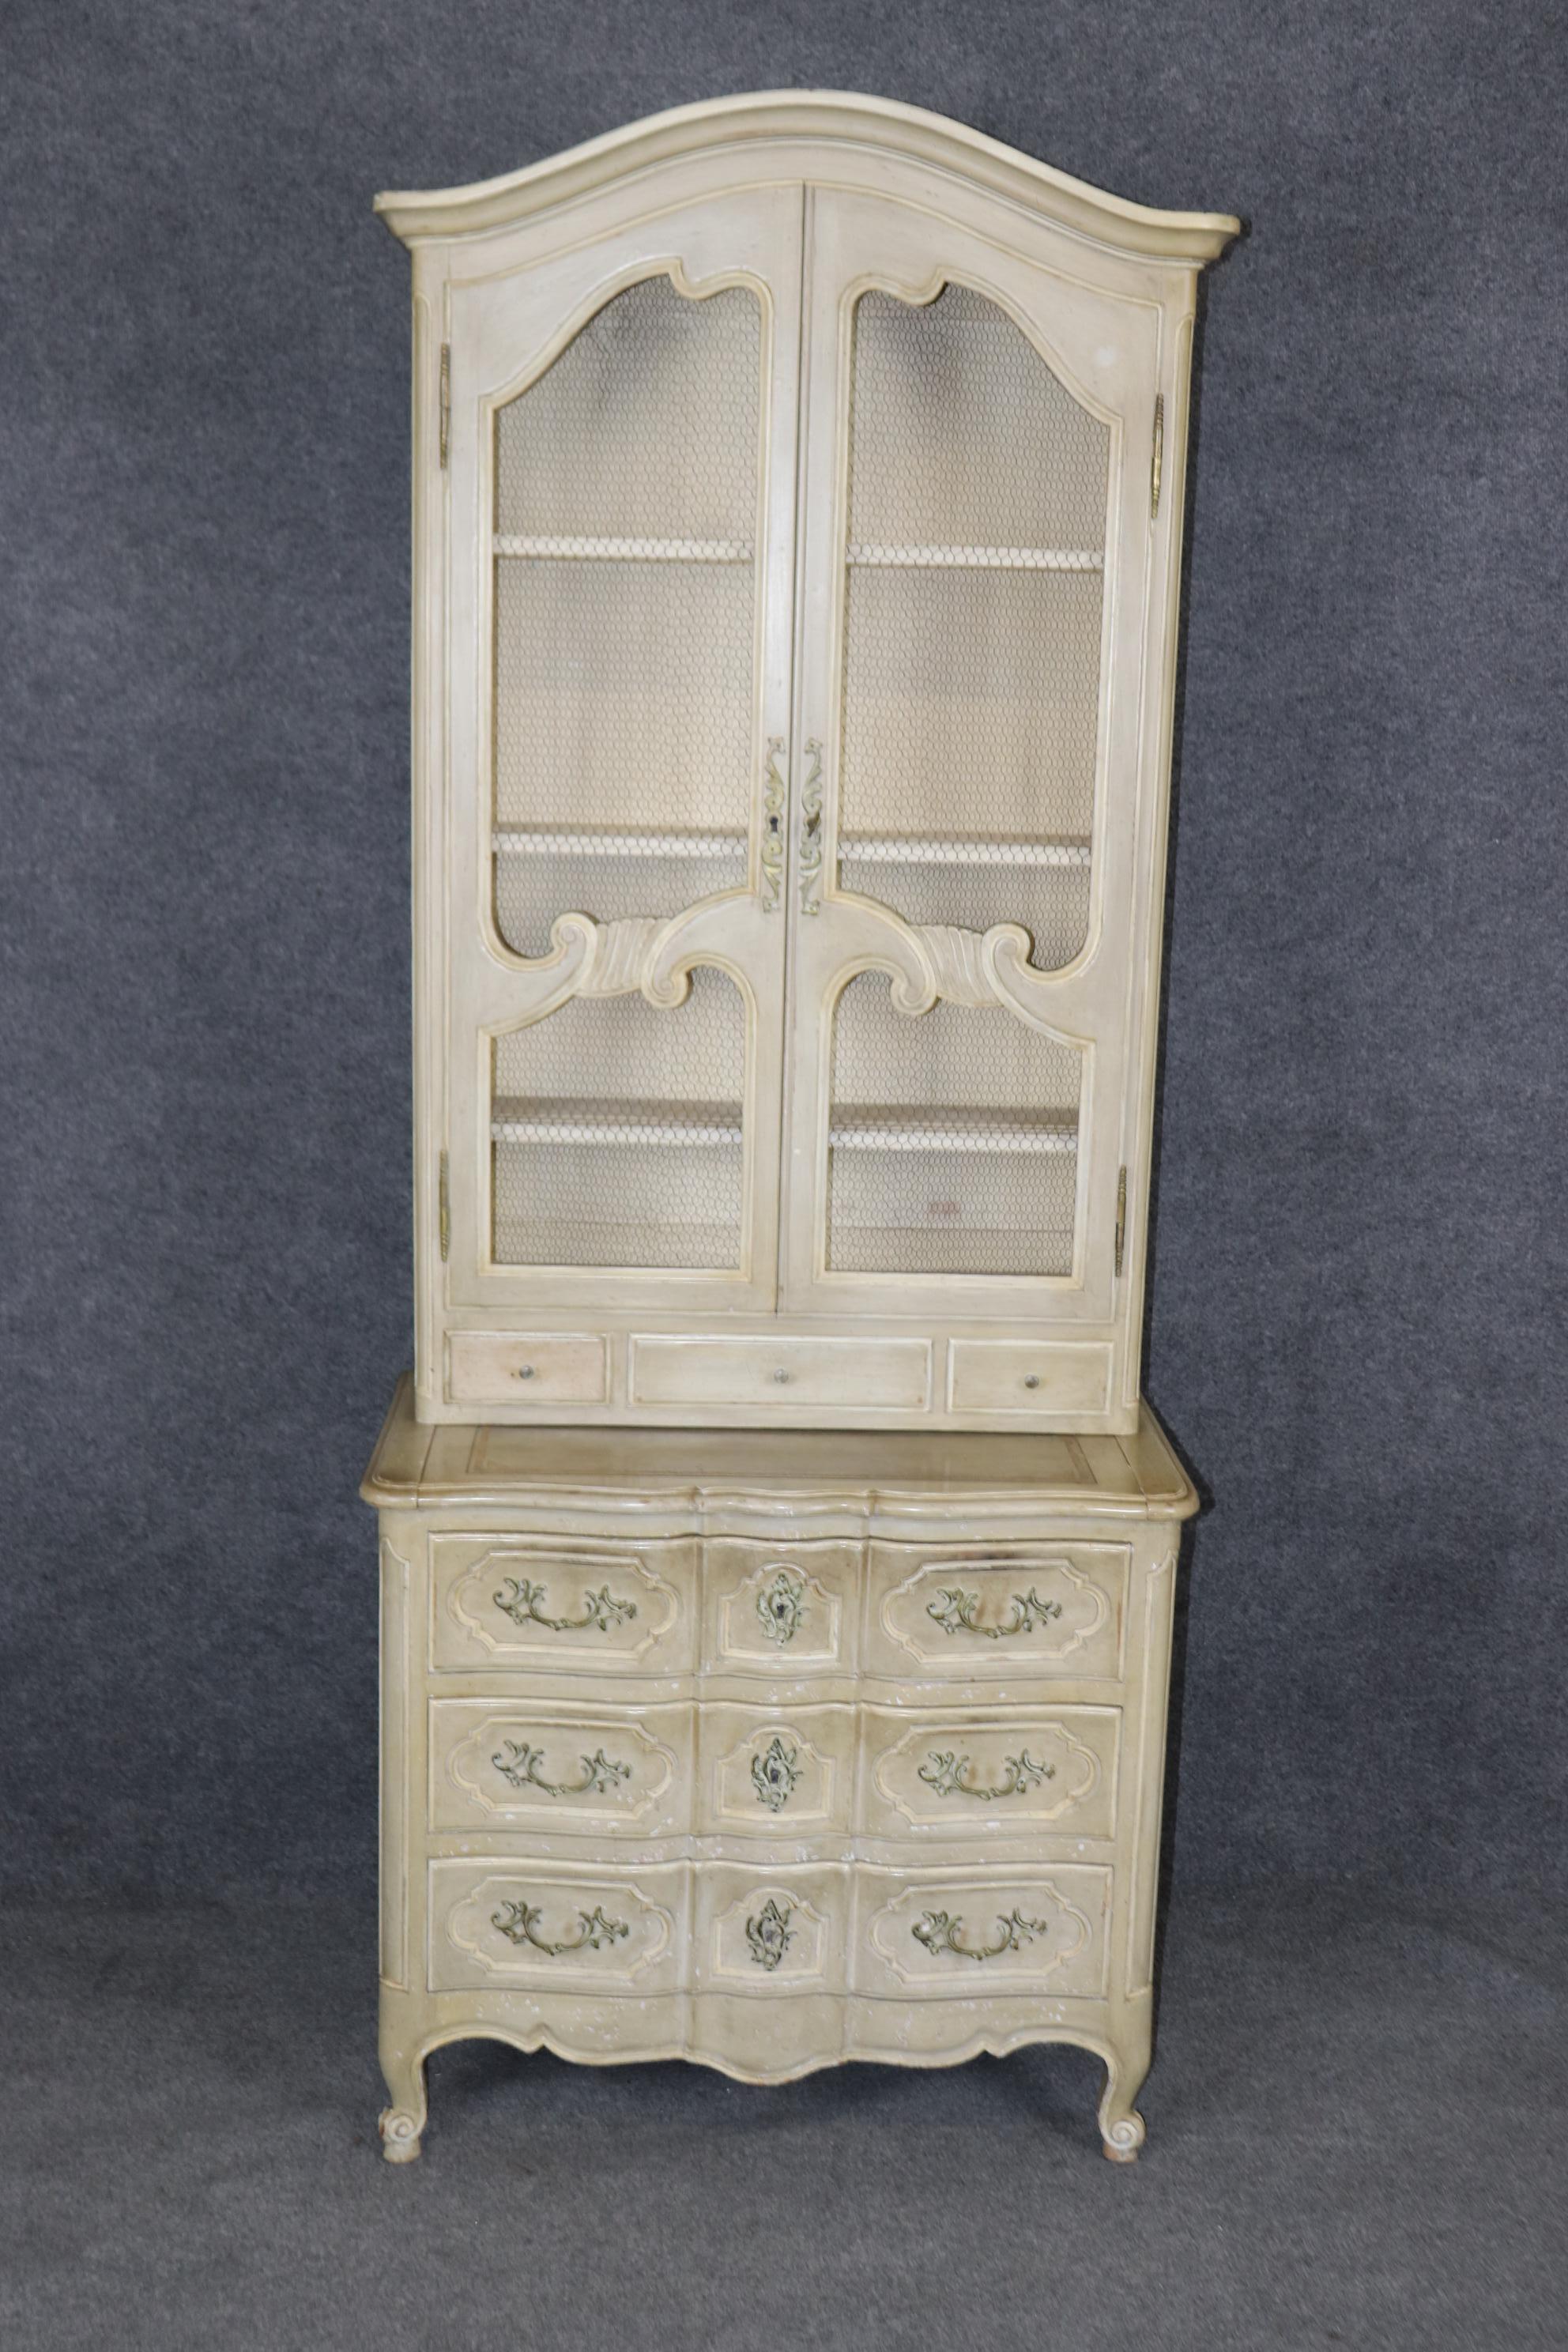 Mid-20th Century Superb Shallow Depth French Country Painted Mesh Door Secretary Desk  For Sale